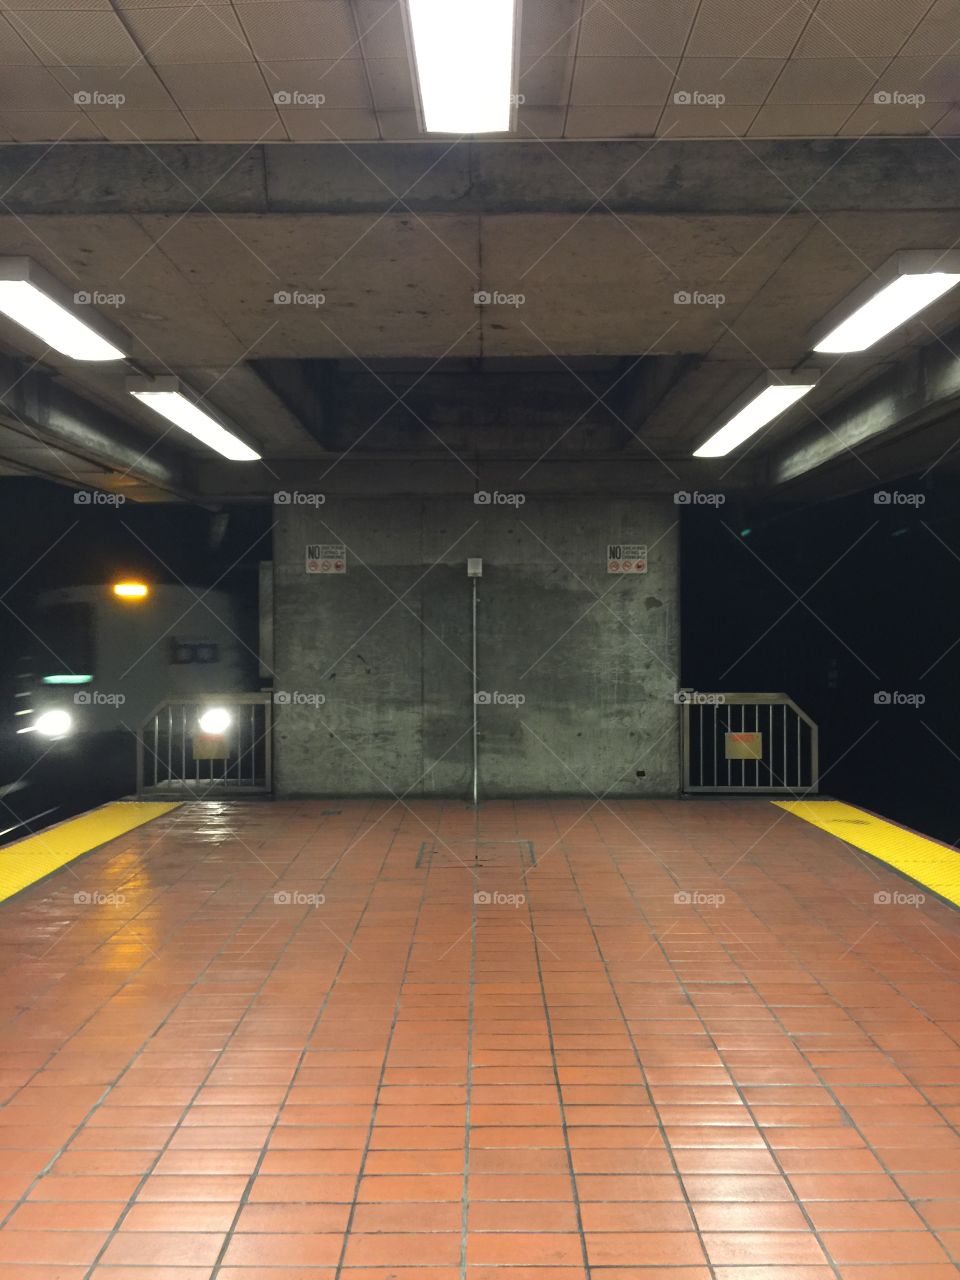 Indoors, Subway System, No Person, Light, Empty